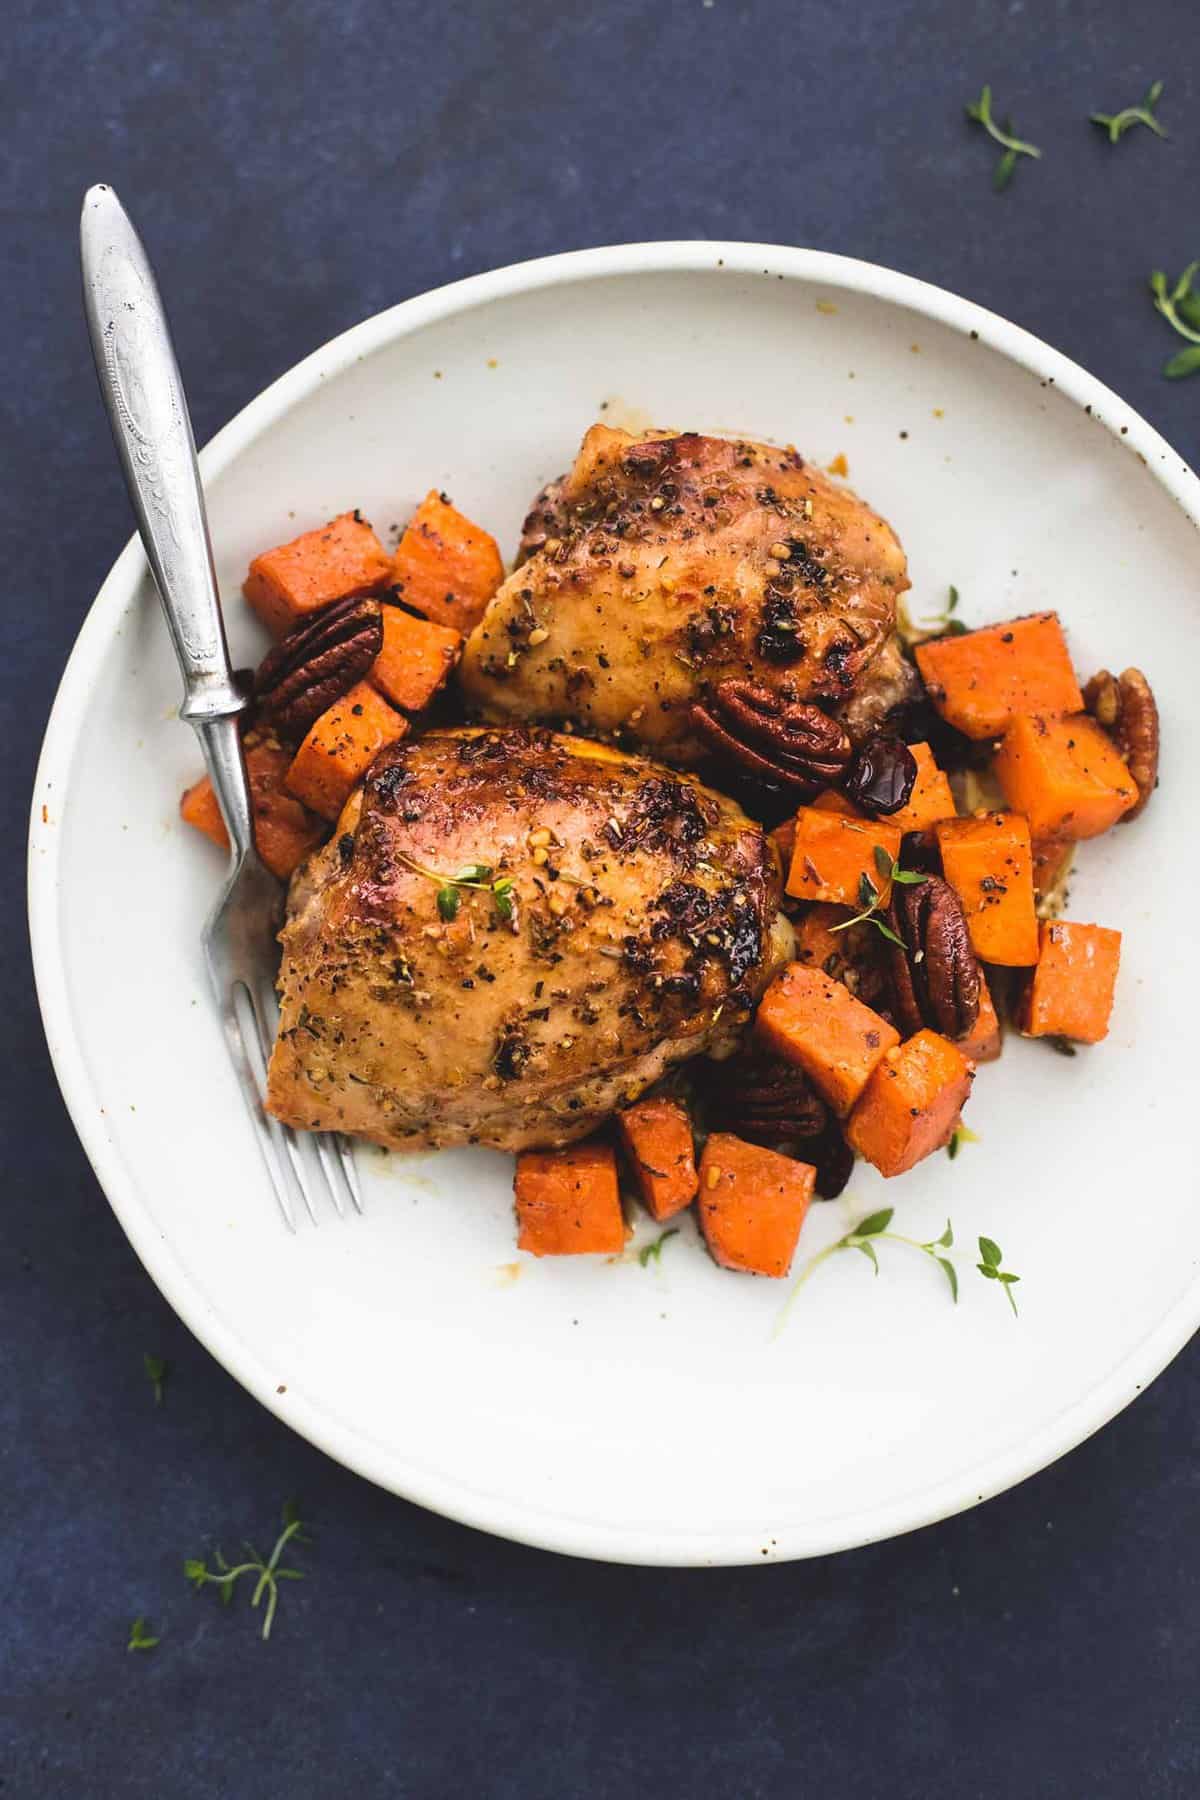 This easy and simple honey roasted chicken and sweet potatoes skillet is everything you want in a hearty, comforting Fall meal. This tasty one pan meal will be ready in about 30 minutes and you will love the flavors!  | lecremedelacrumb.com